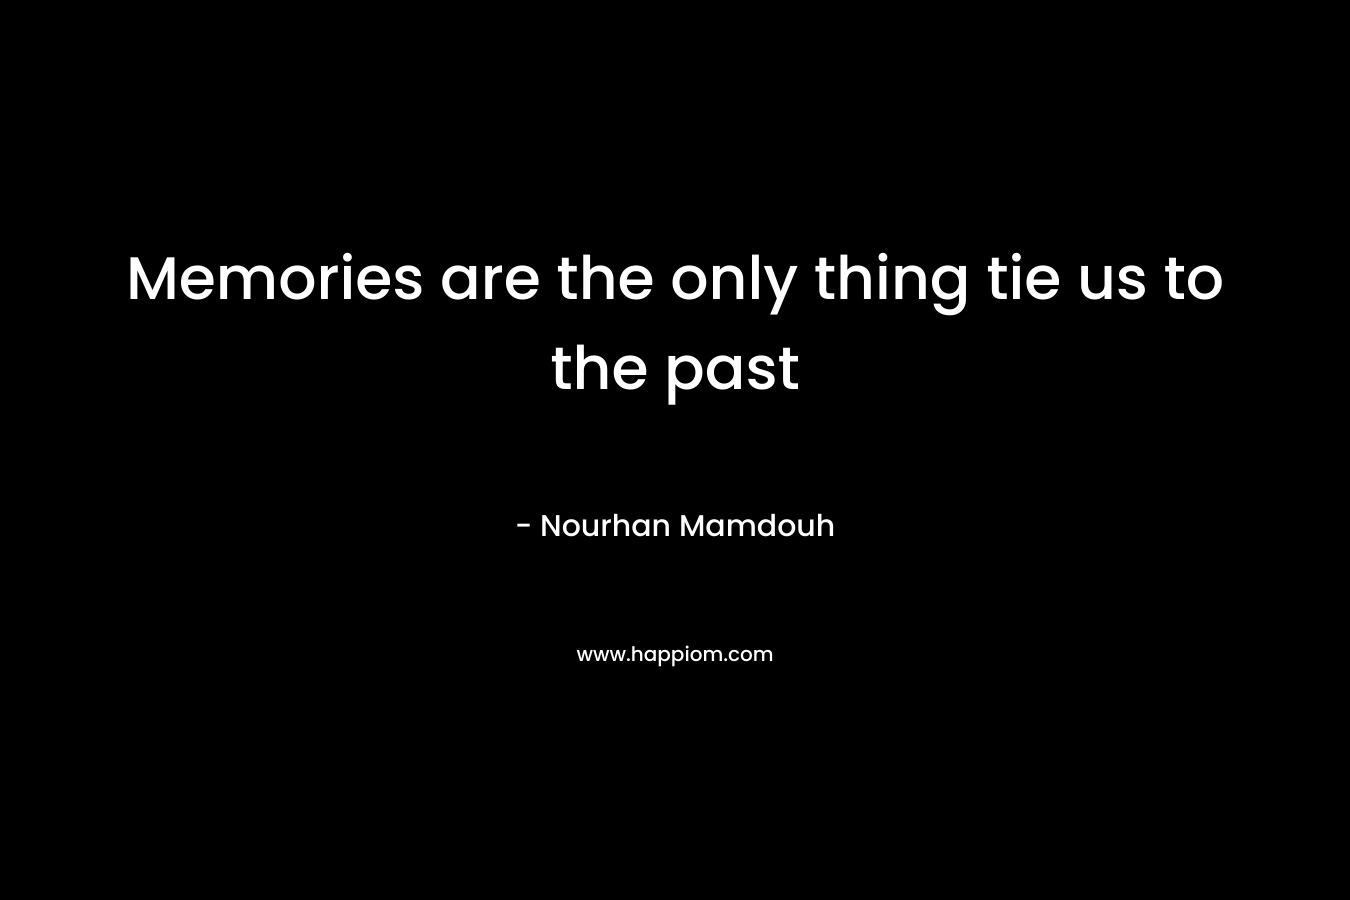 Memories are the only thing tie us to the past – Nourhan Mamdouh